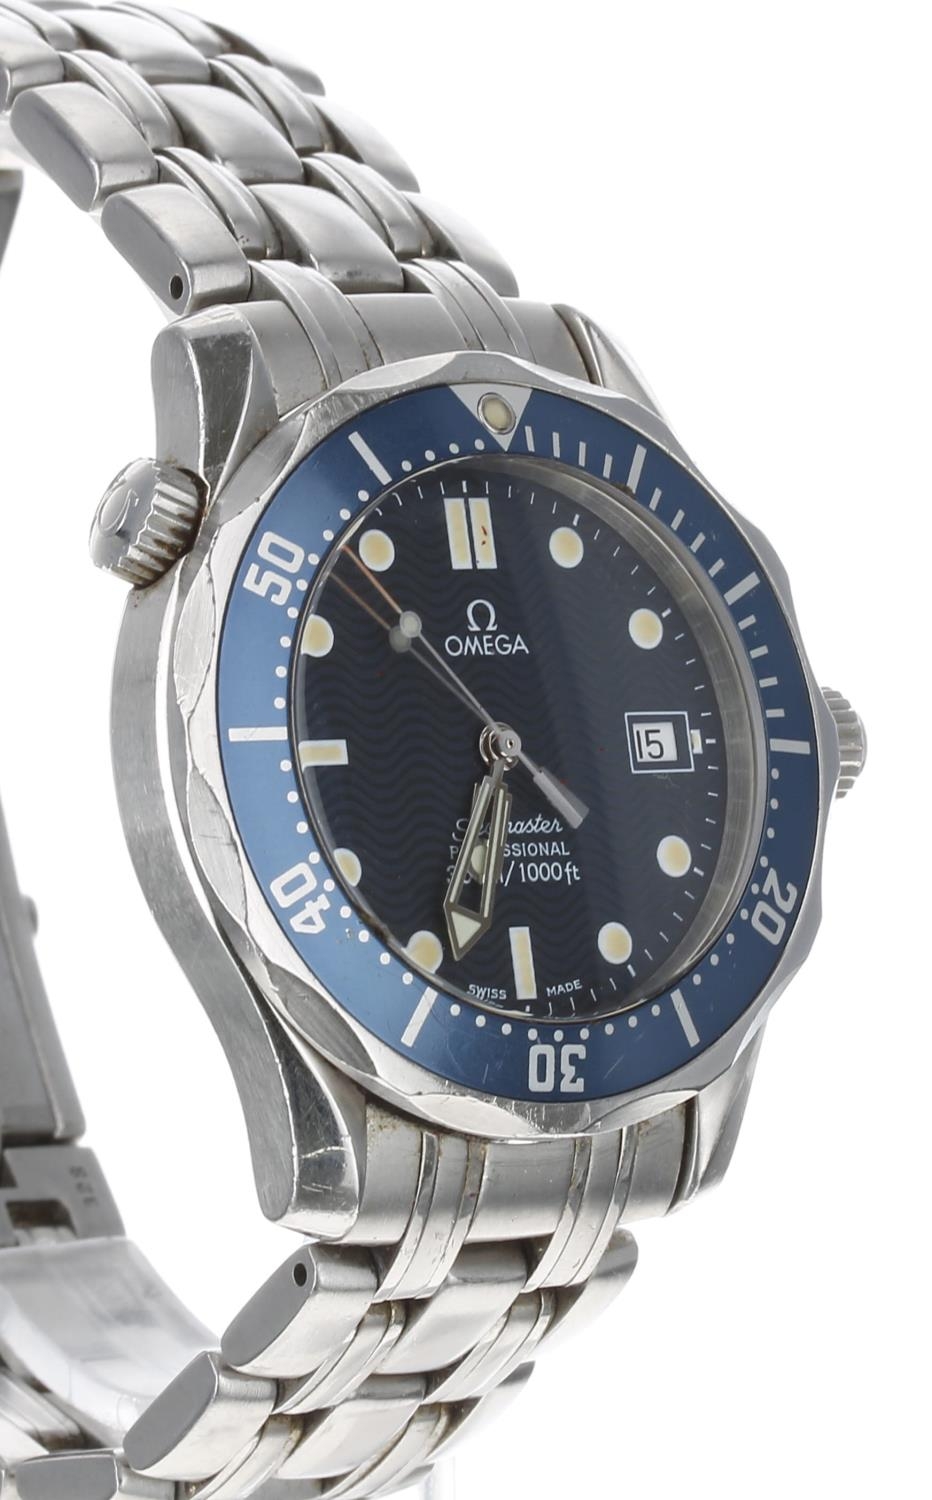 Omega Seamaster Professional 300m/1000ft stainless steel gentleman's wristwatch, reference no. 196. - Image 3 of 5